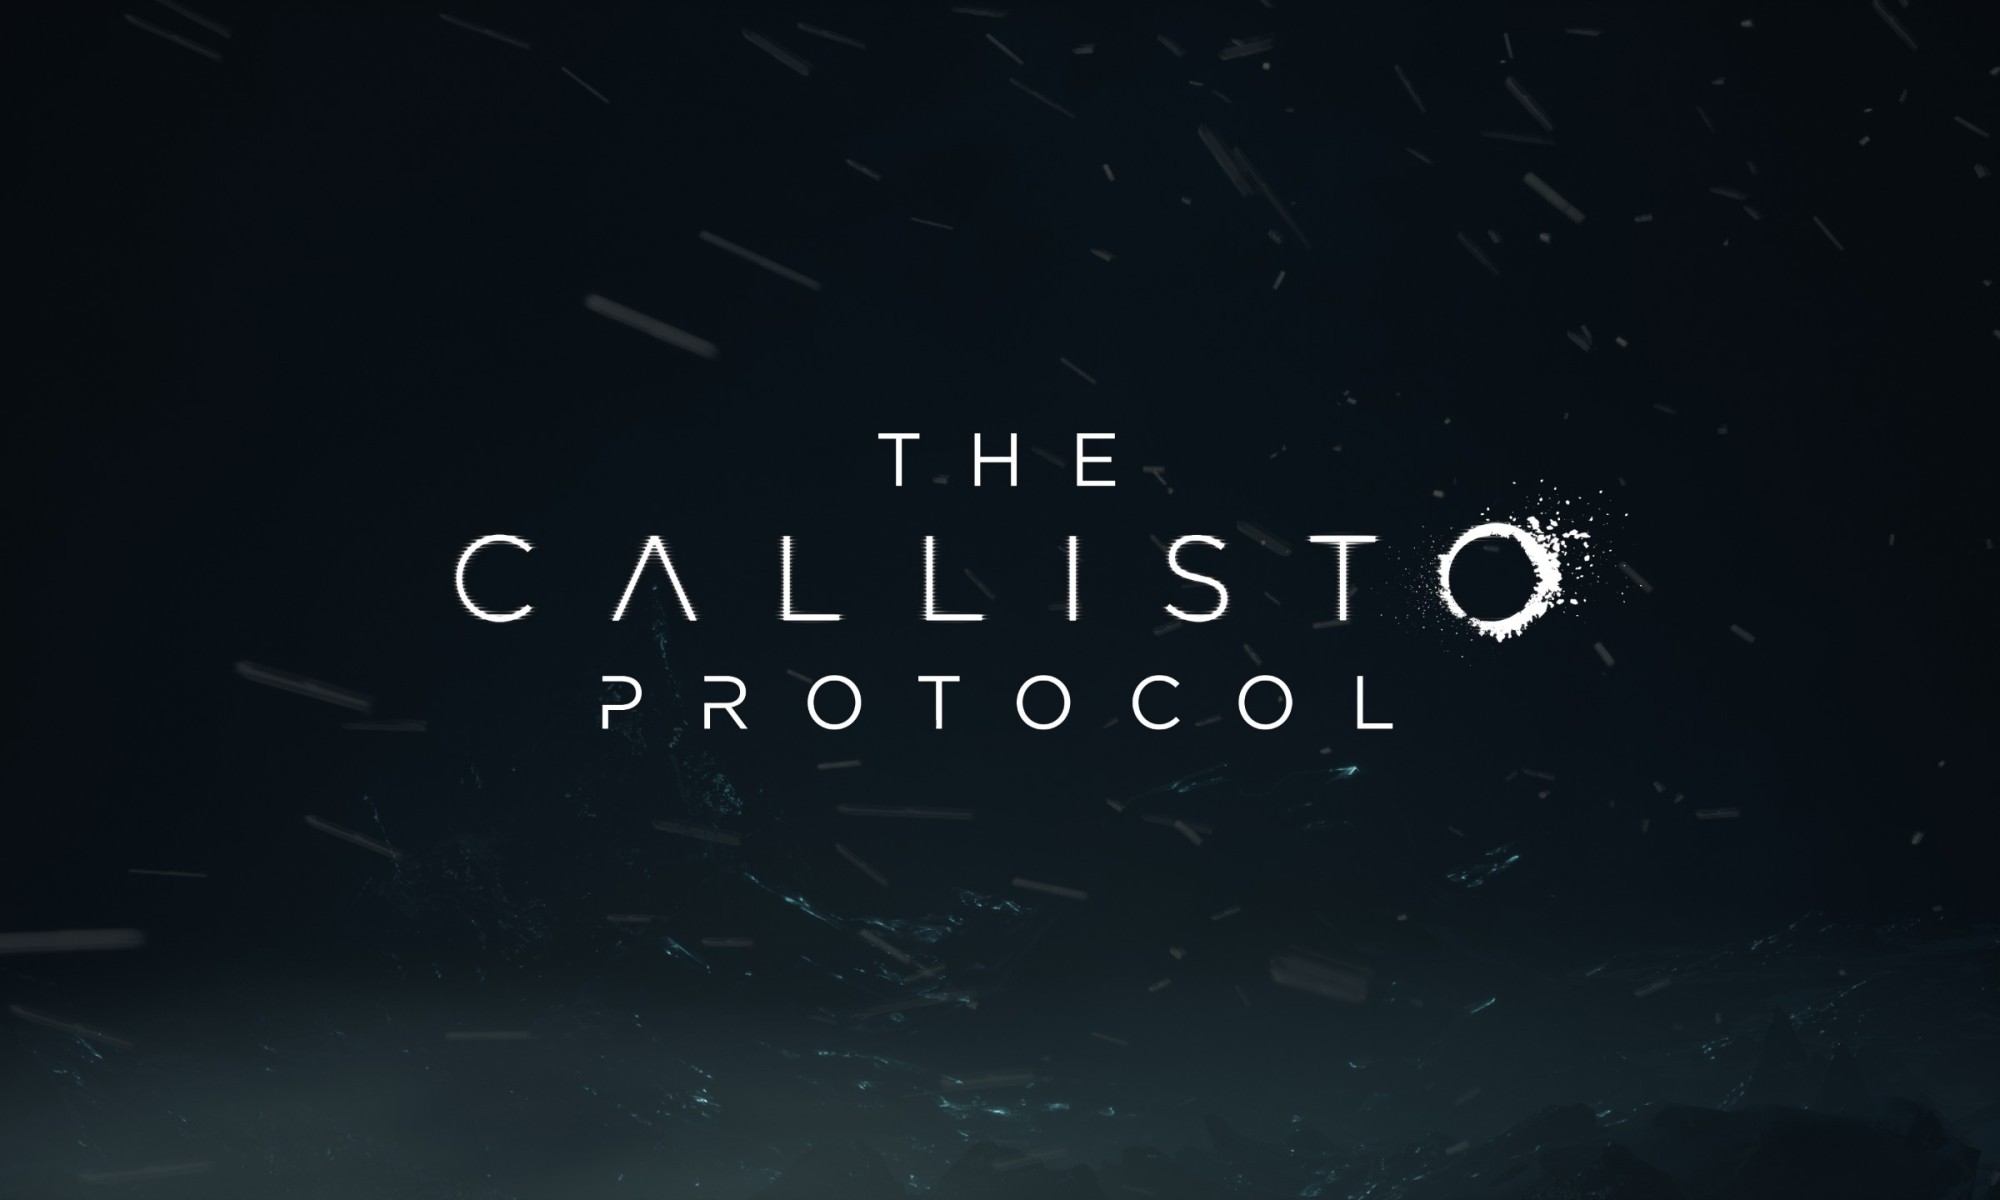 DON'T Buy The Callisto Protocol (Just Don't) 